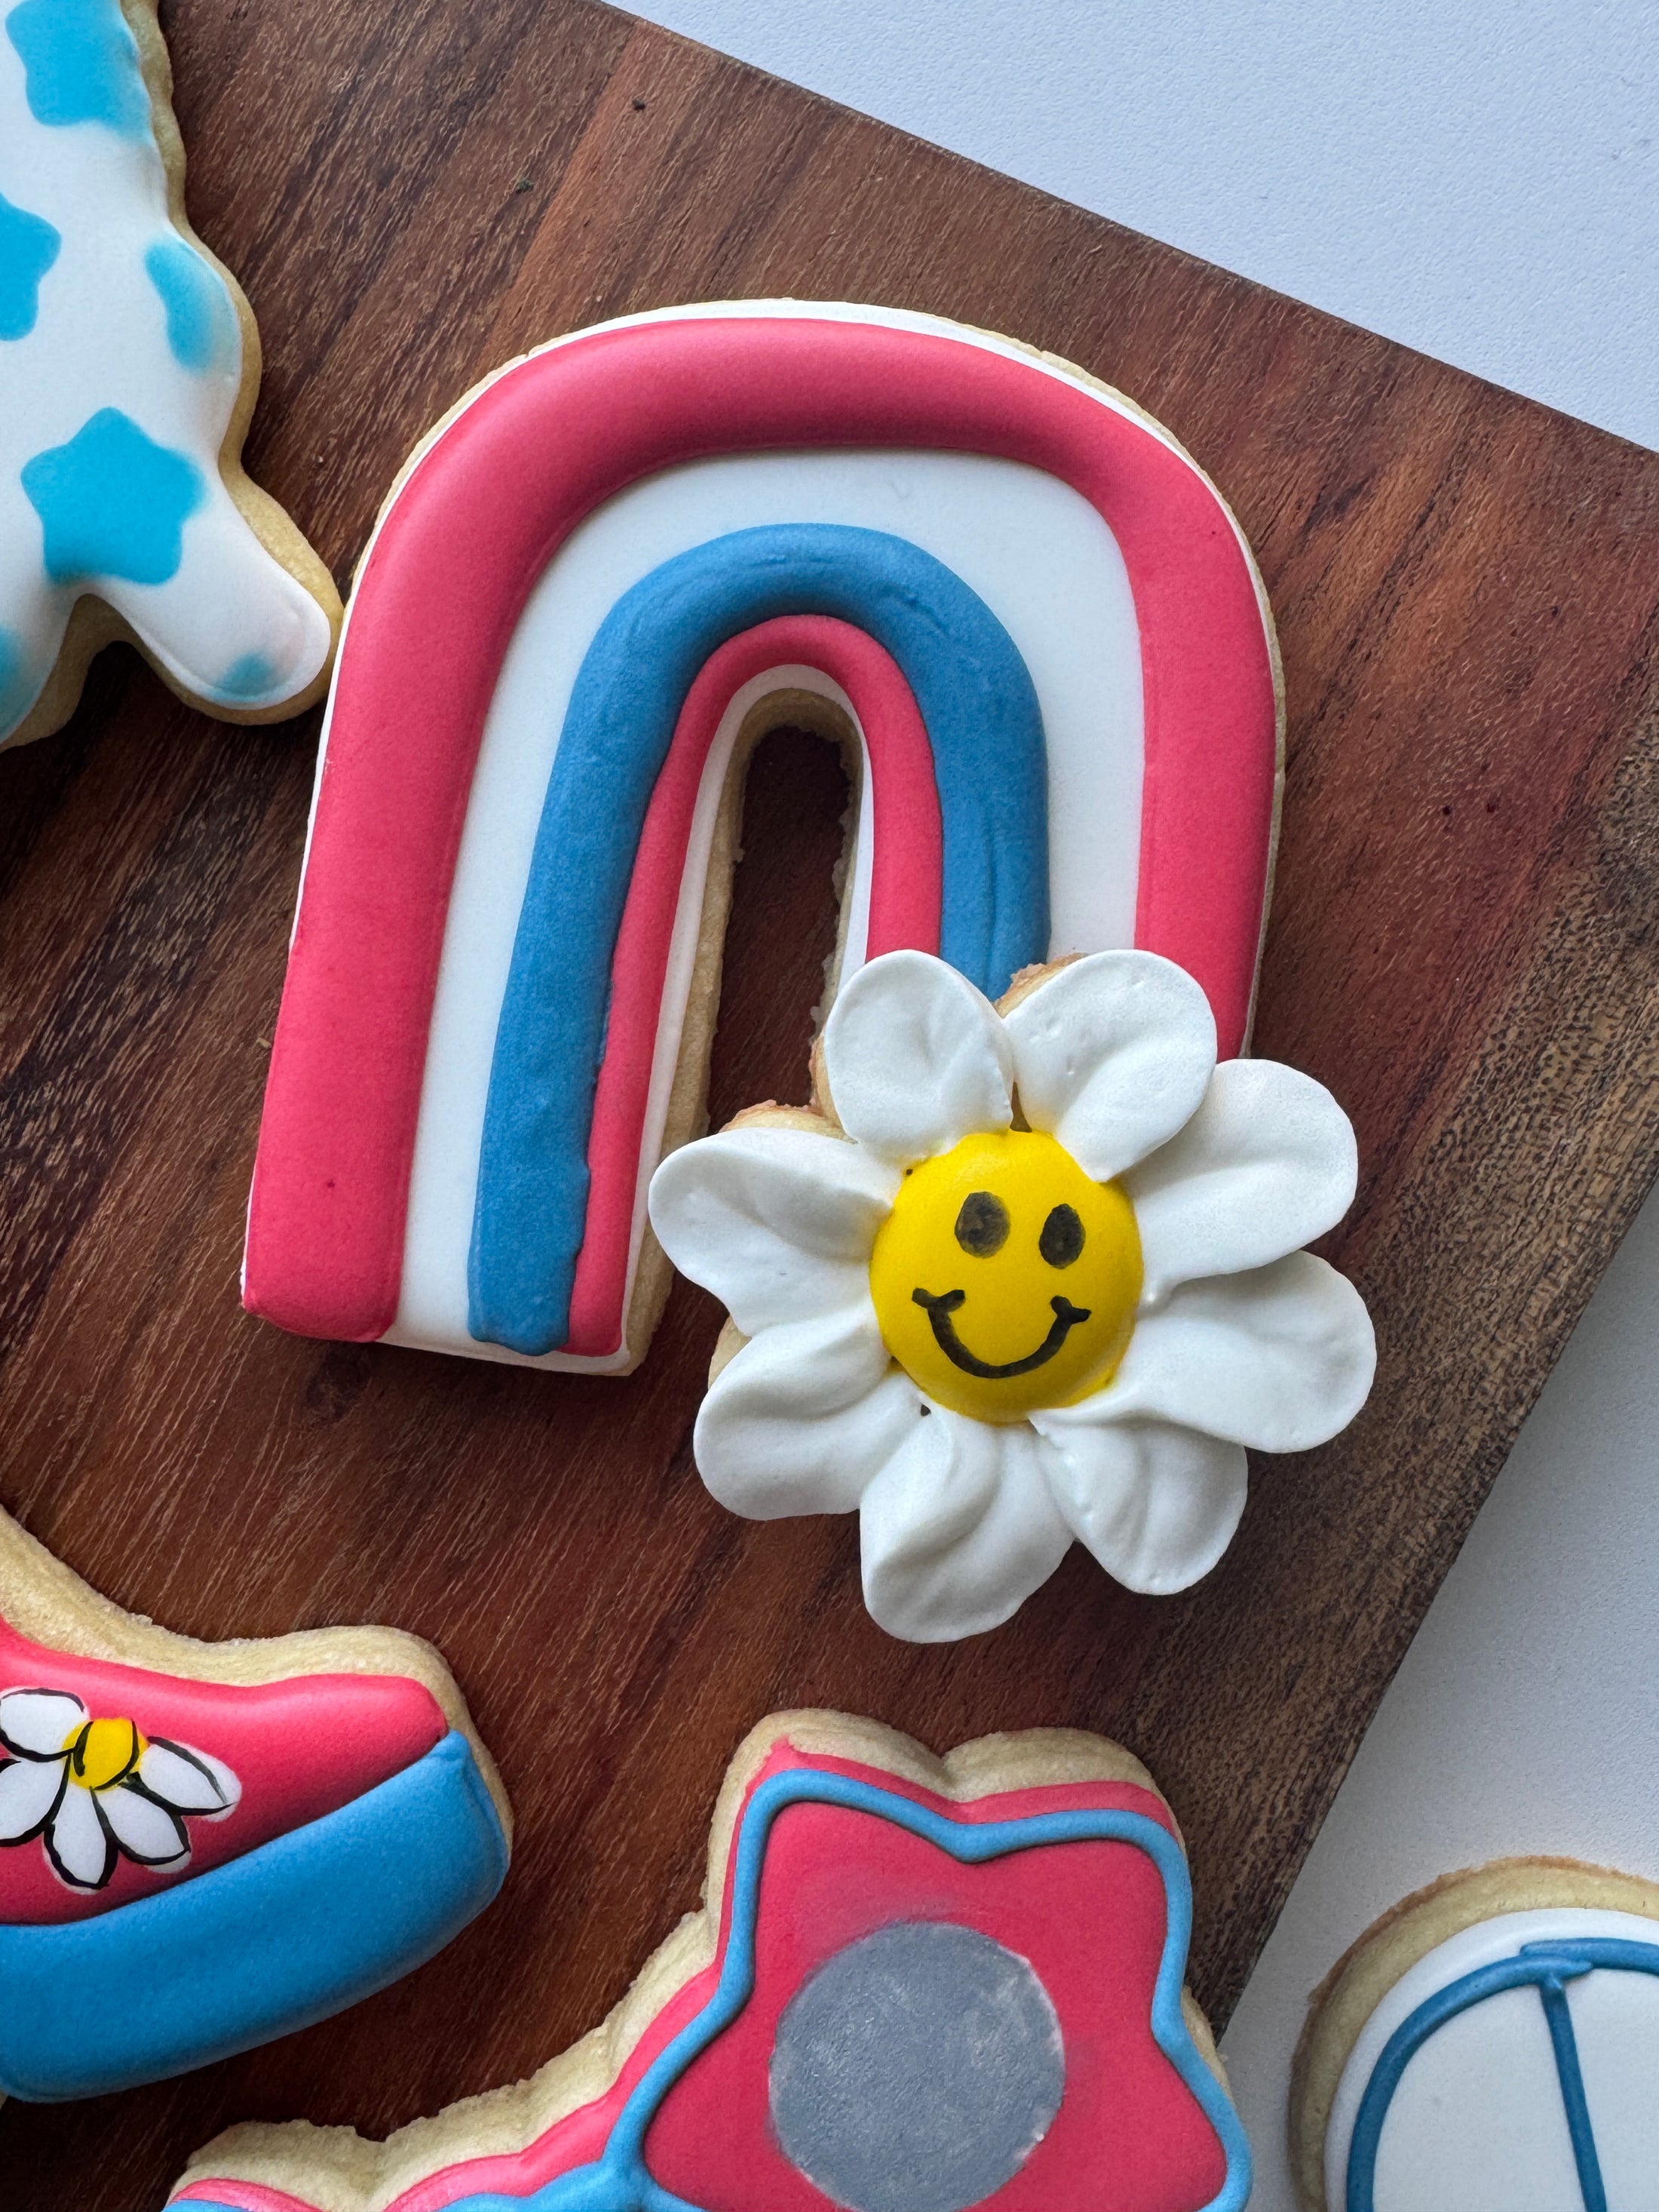 The Cheerful Box Cookie Decorating Kit